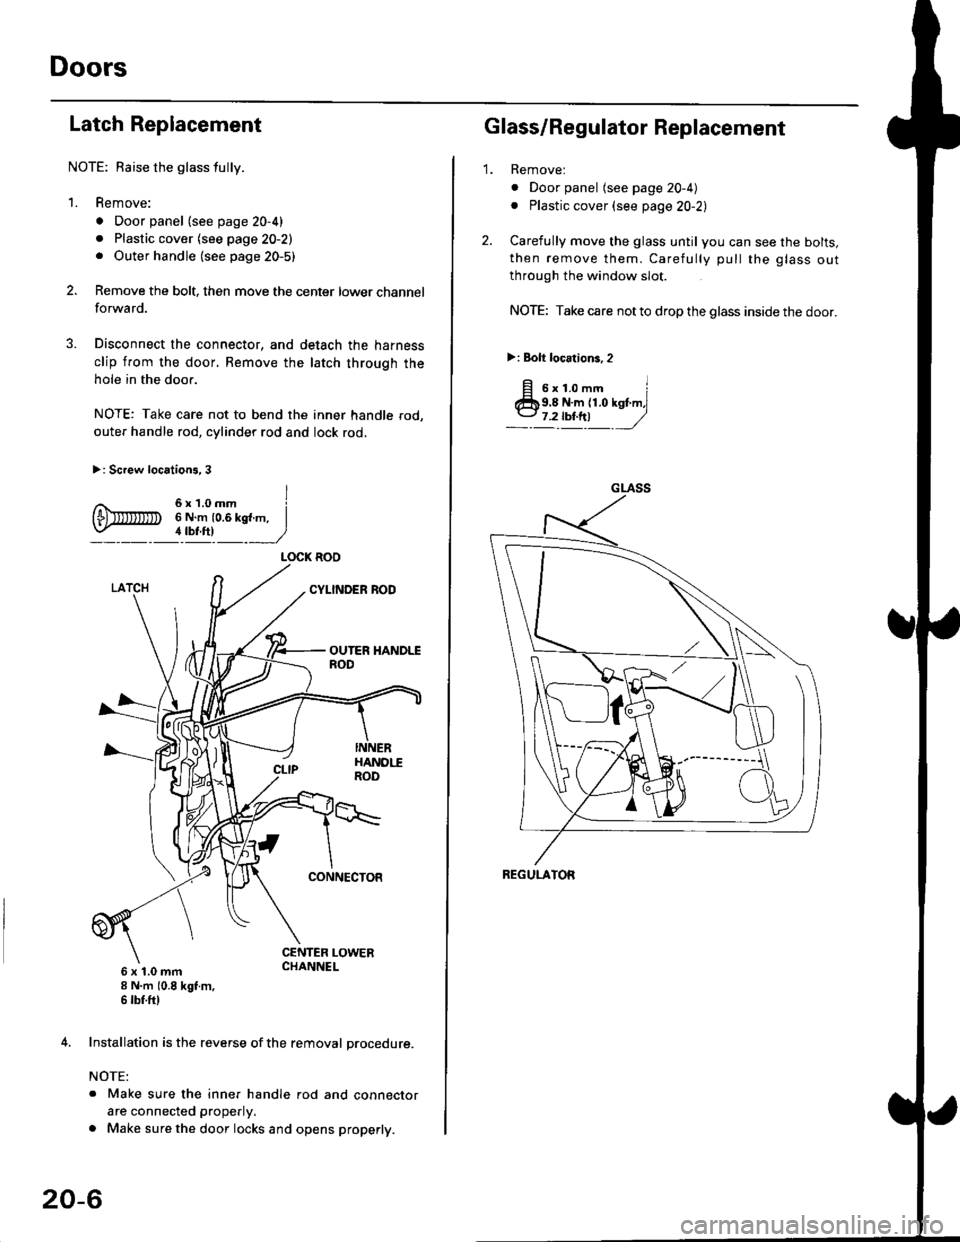 HONDA CIVIC 1997 6.G Workshop Manual Doors
Latch Replacement
NOTE: Baise the glass fully.
1. Remove:
. Door panel (see page 20-4)
. Plastic cover (see page 20-2). Outer handle (see page 20-5)
Remove the bolt, then move the center lower c